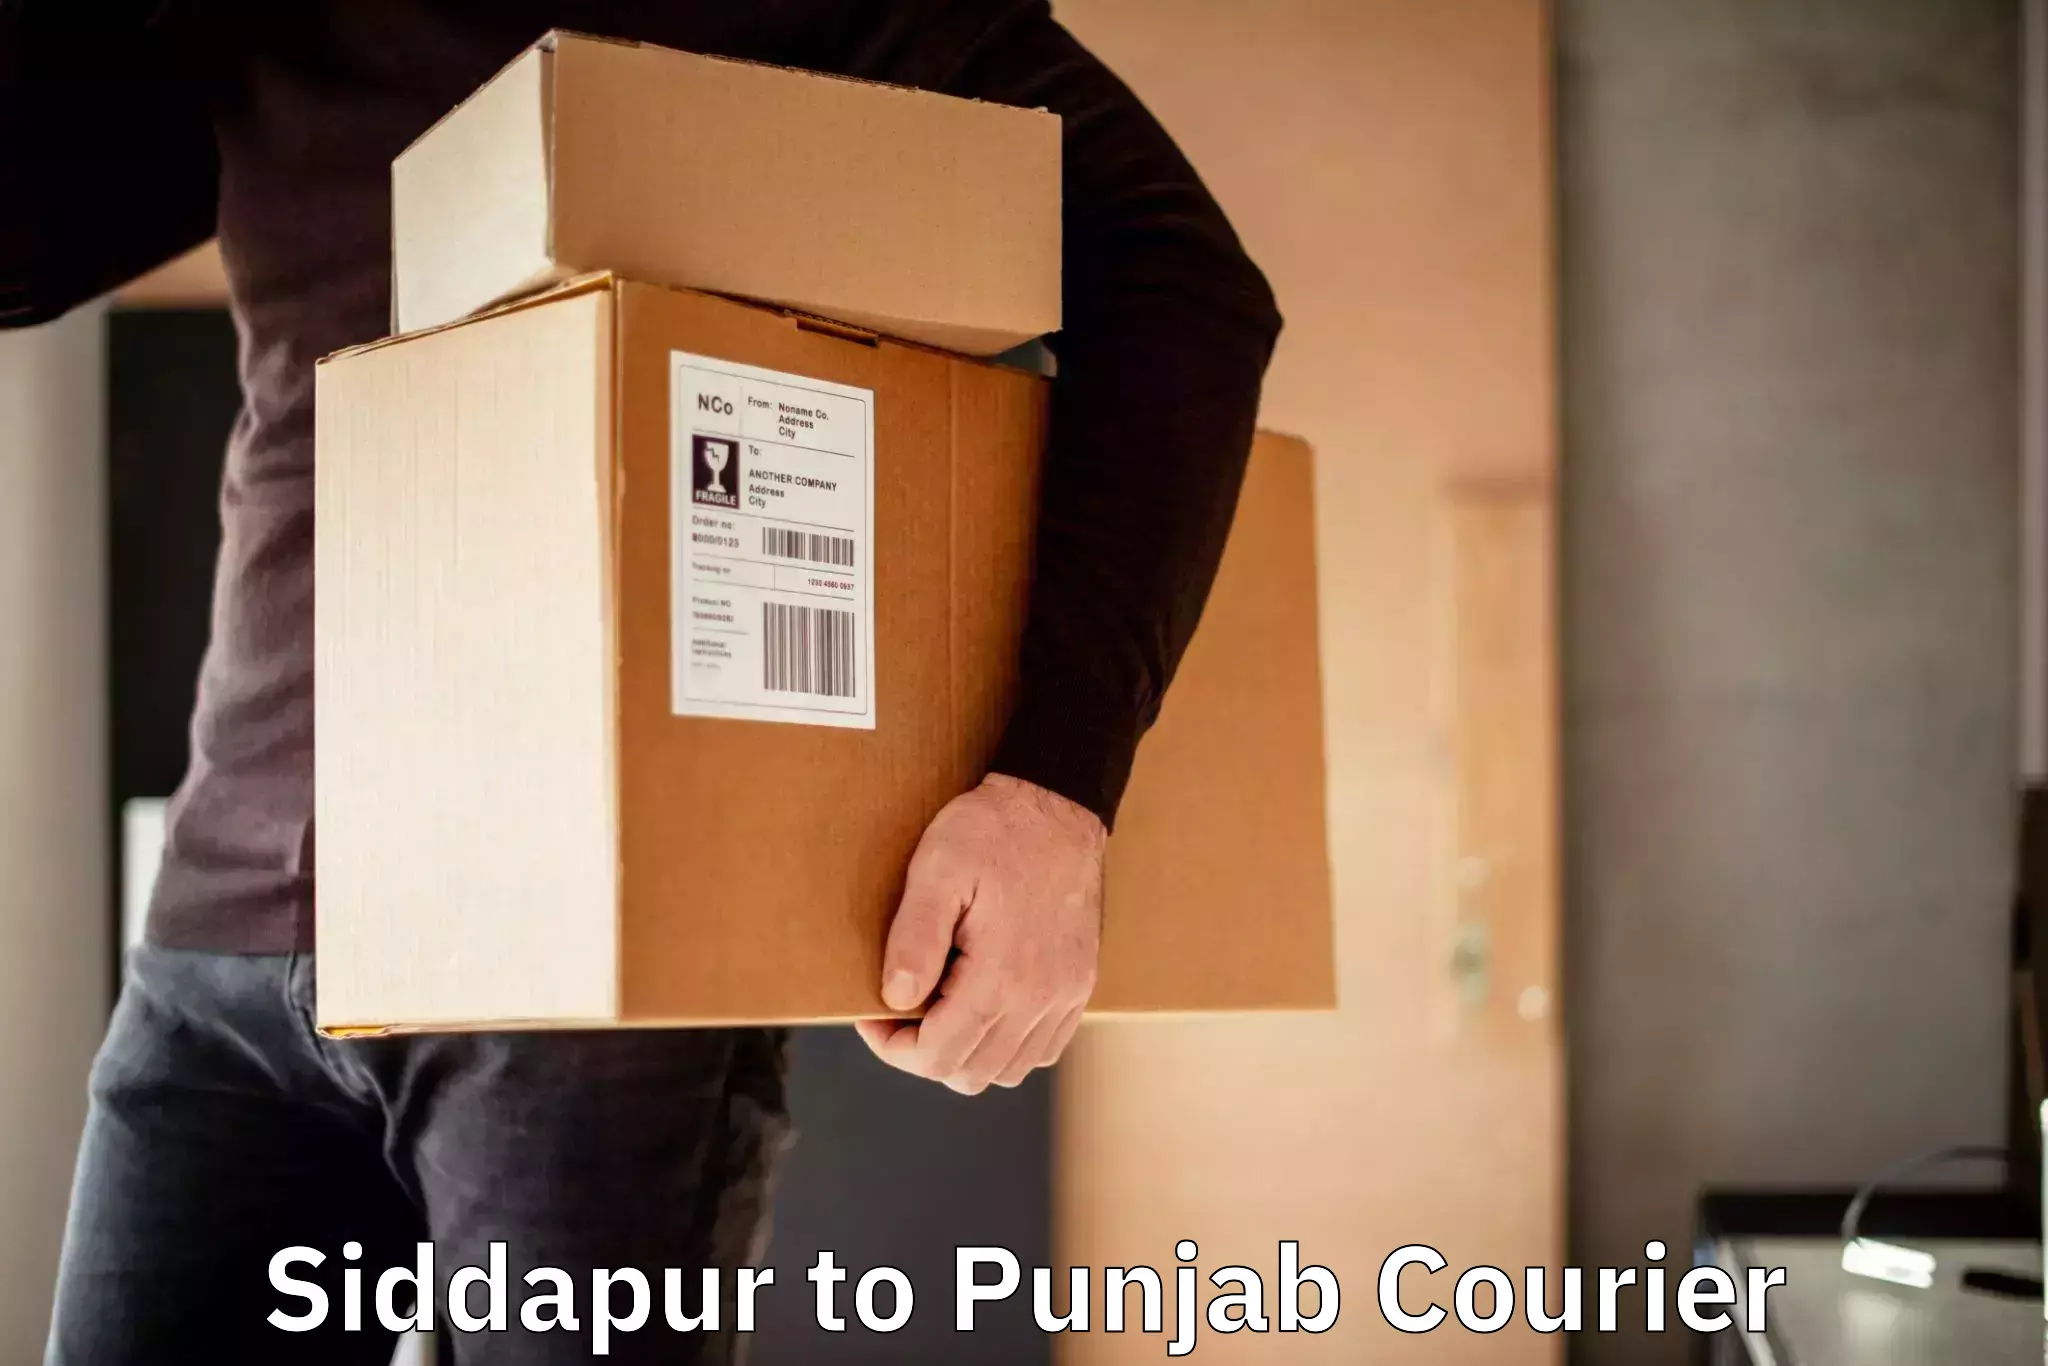 Cash on delivery service Siddapur to Punjab